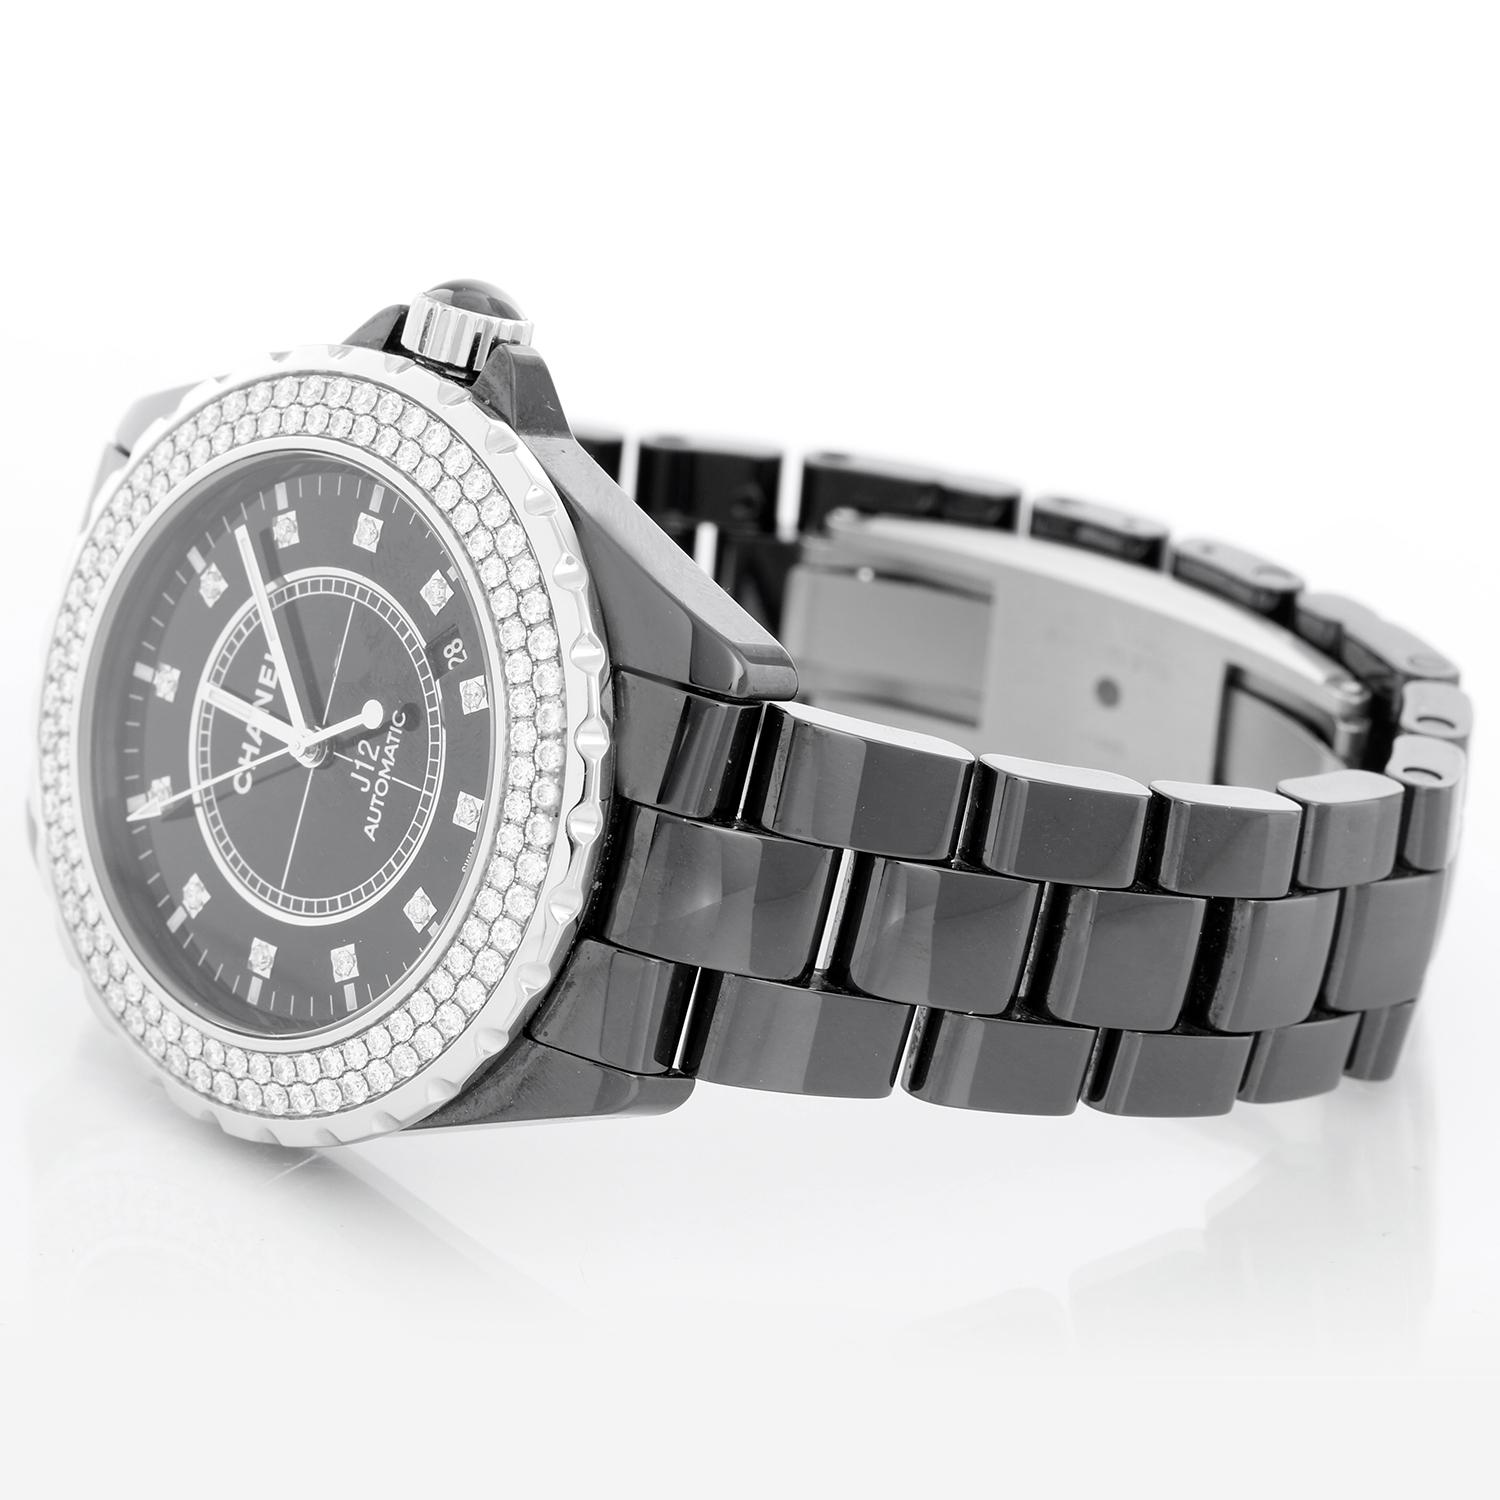 Chanel J12 Black Ceramic Automatic Large Unisex Watch - Automatic. Black ceramic case with steel rimmed unidirectional rotating bezel and steel crown with. Two rows of diamond bezel (43mm diameter). Black dial with pave diamond center and diamond